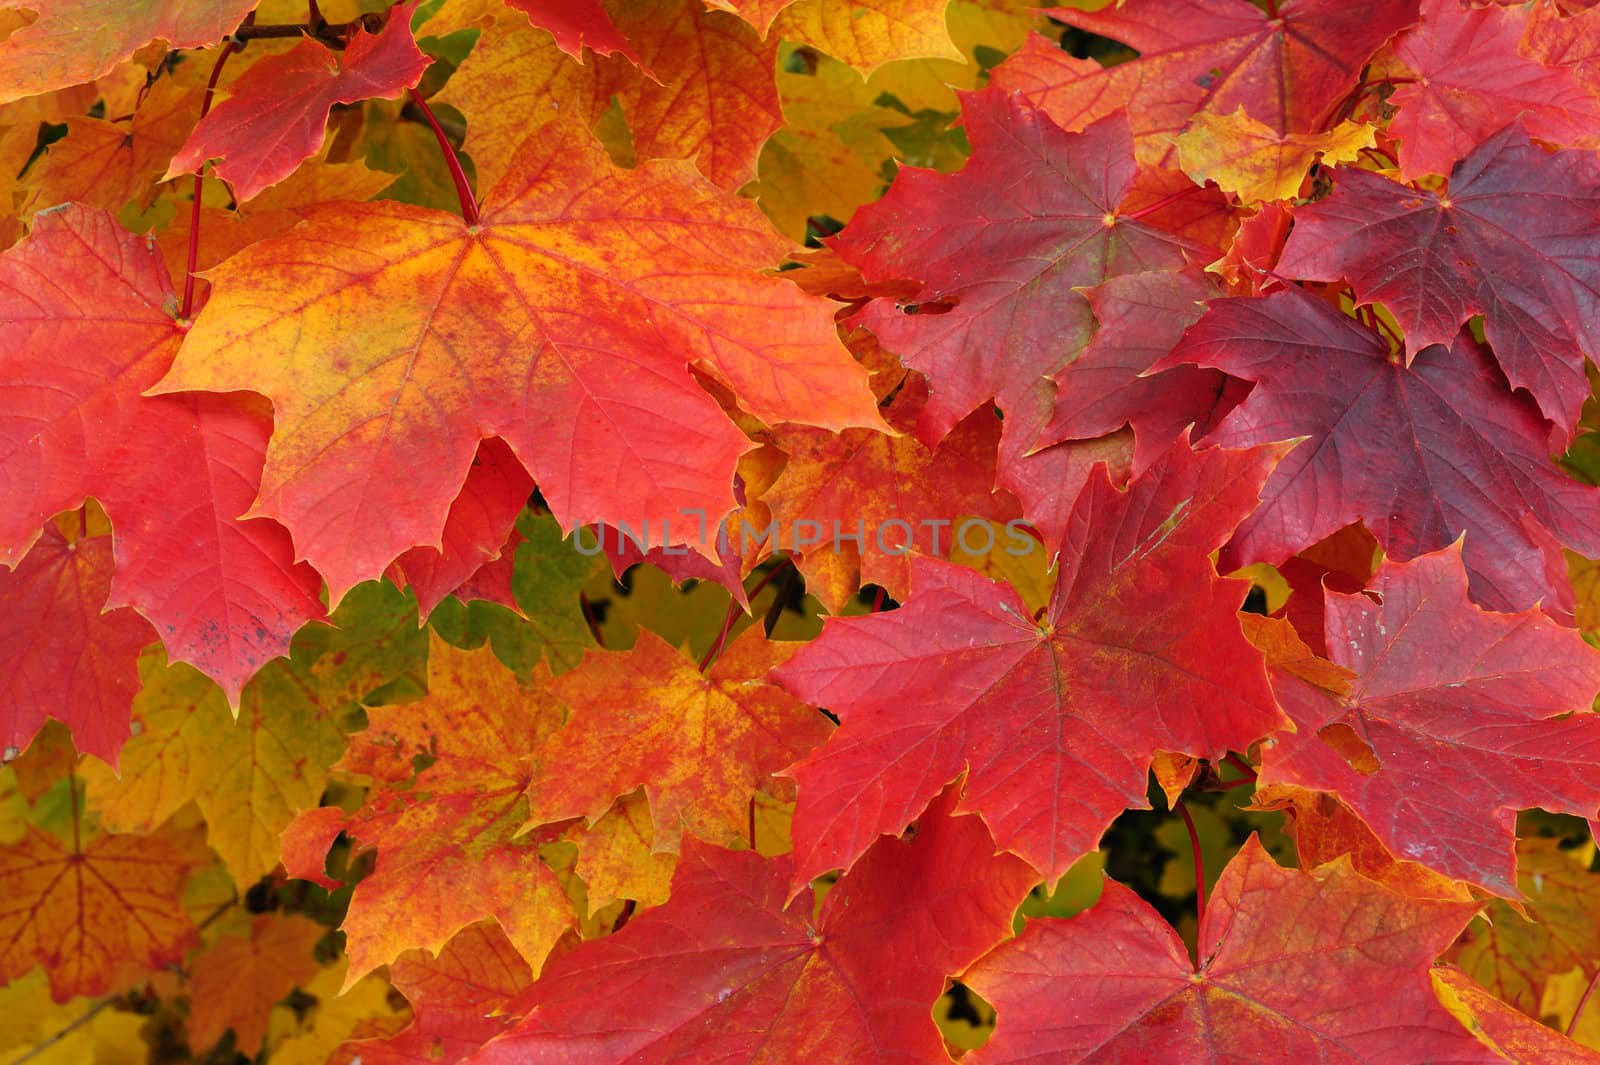 Autumn (Fall) leaves on a maple tree, in closeup